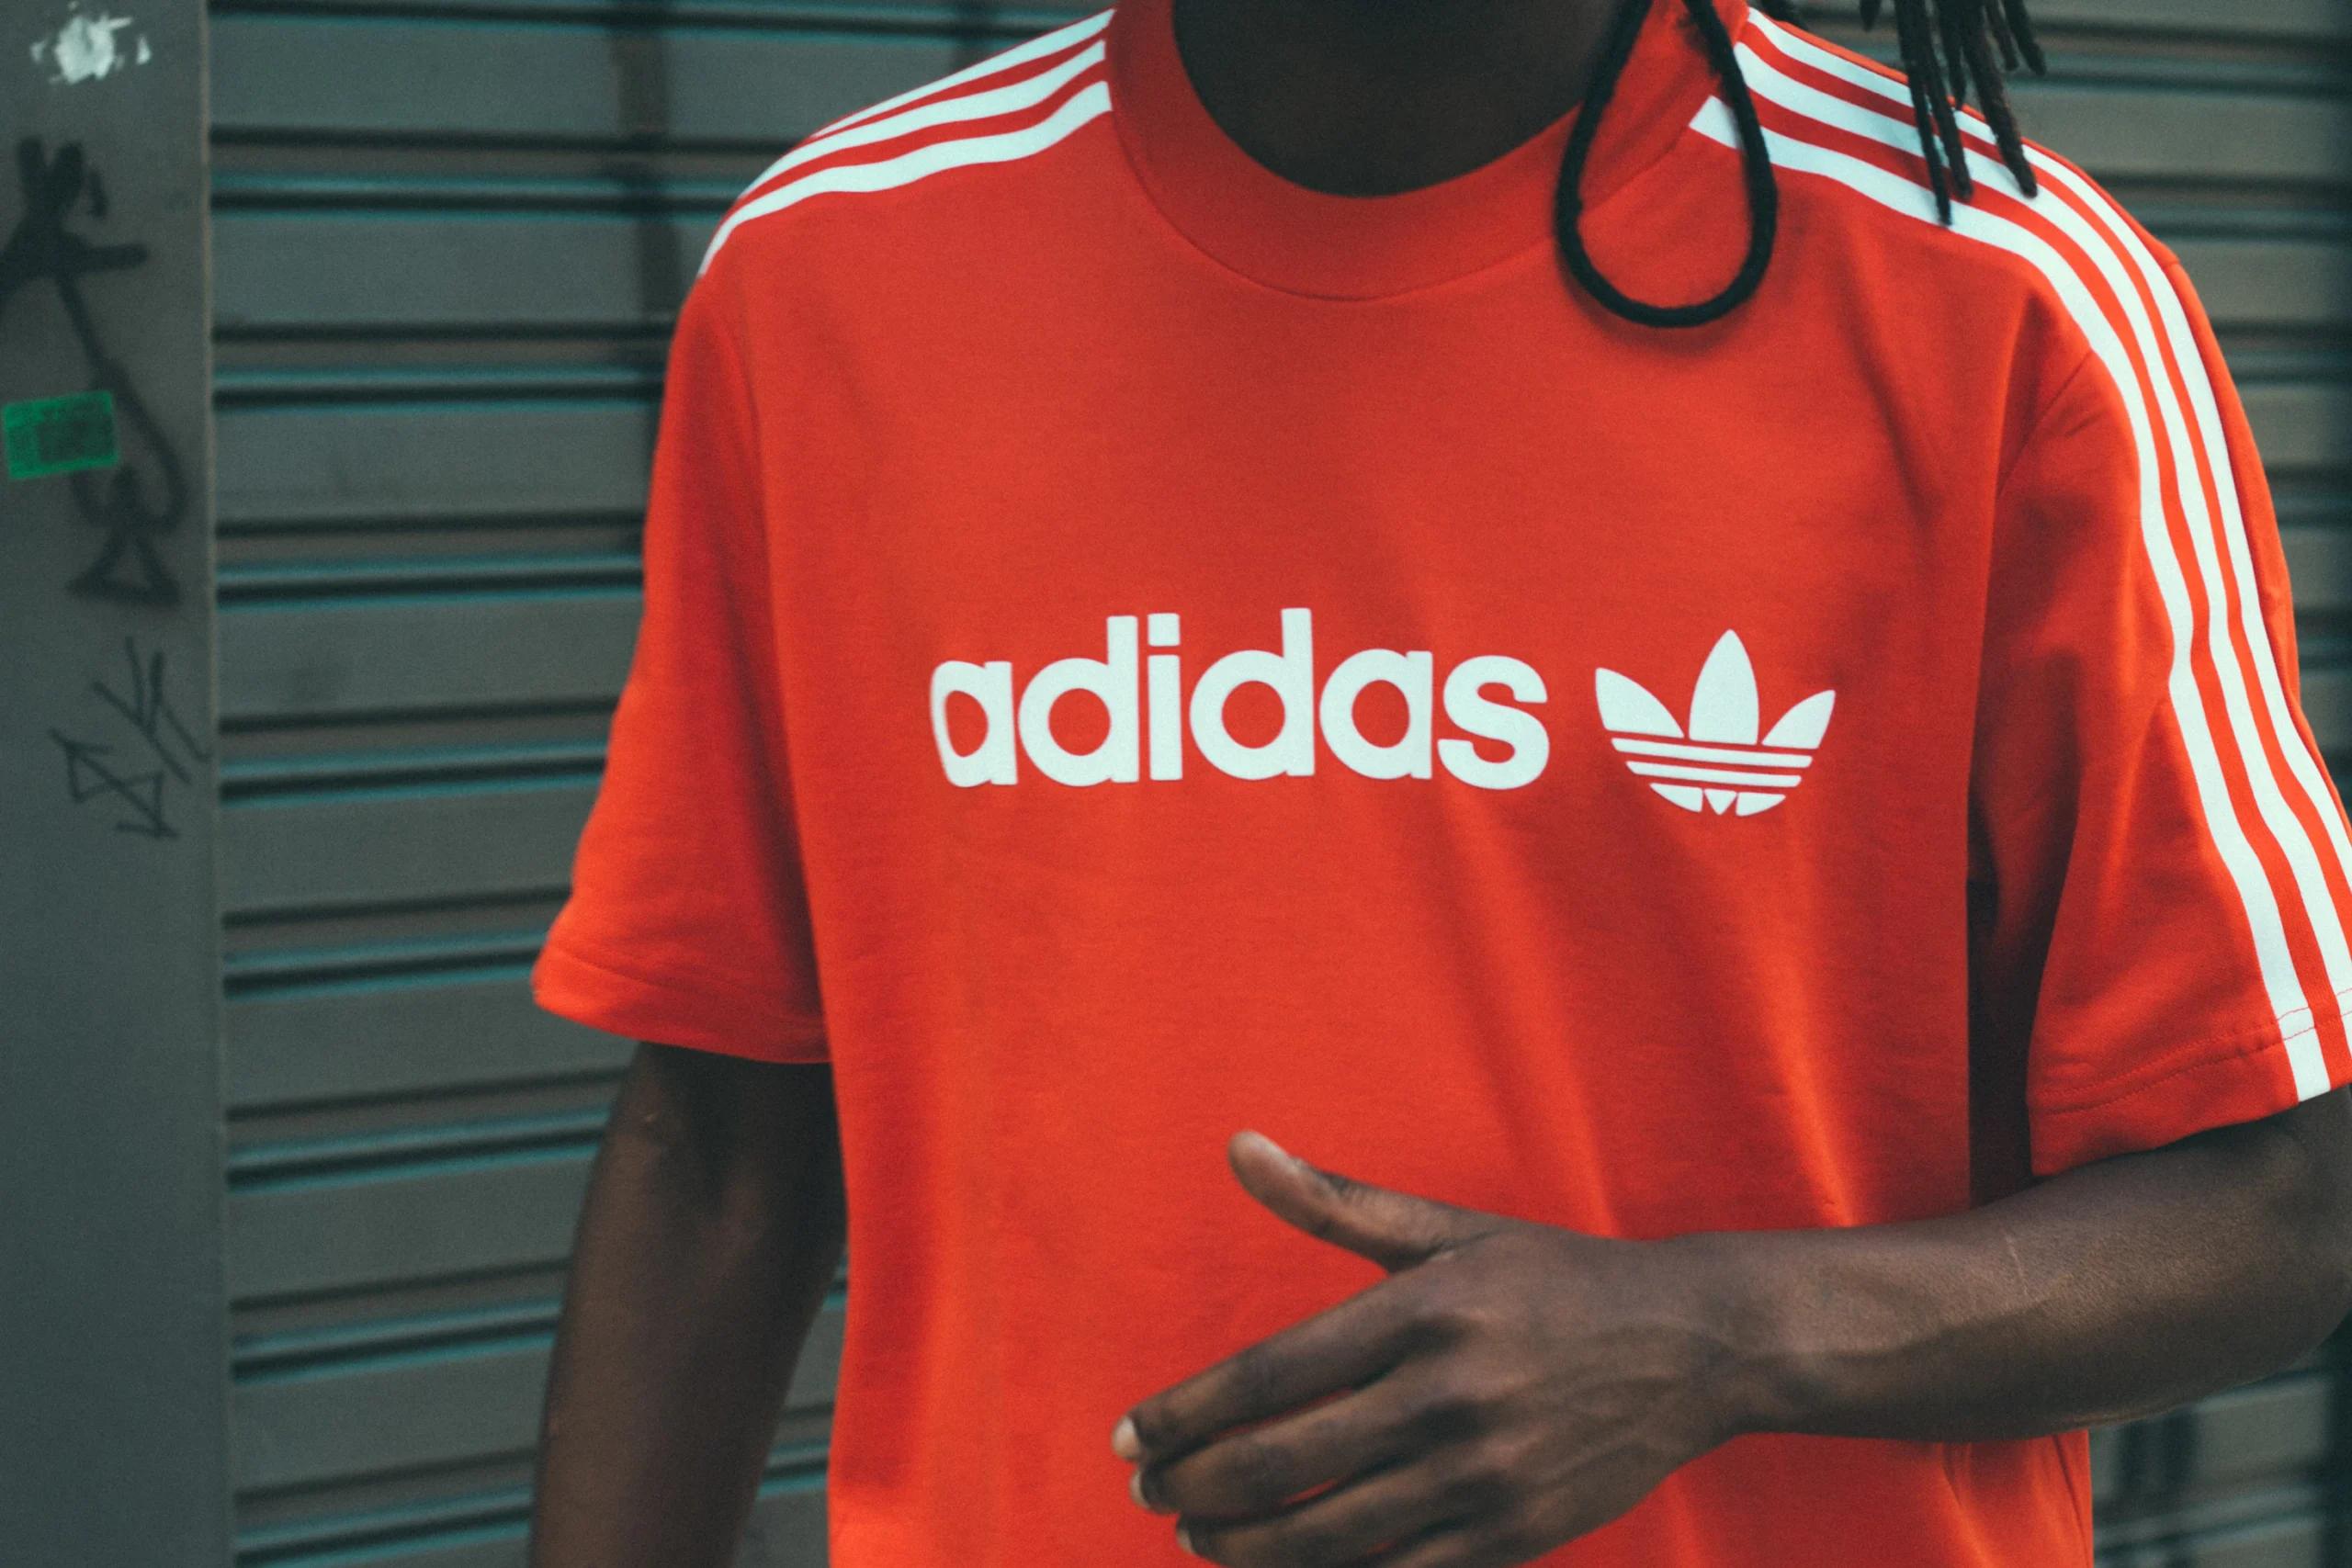 A man wearing a red and white Adidas T-shirt